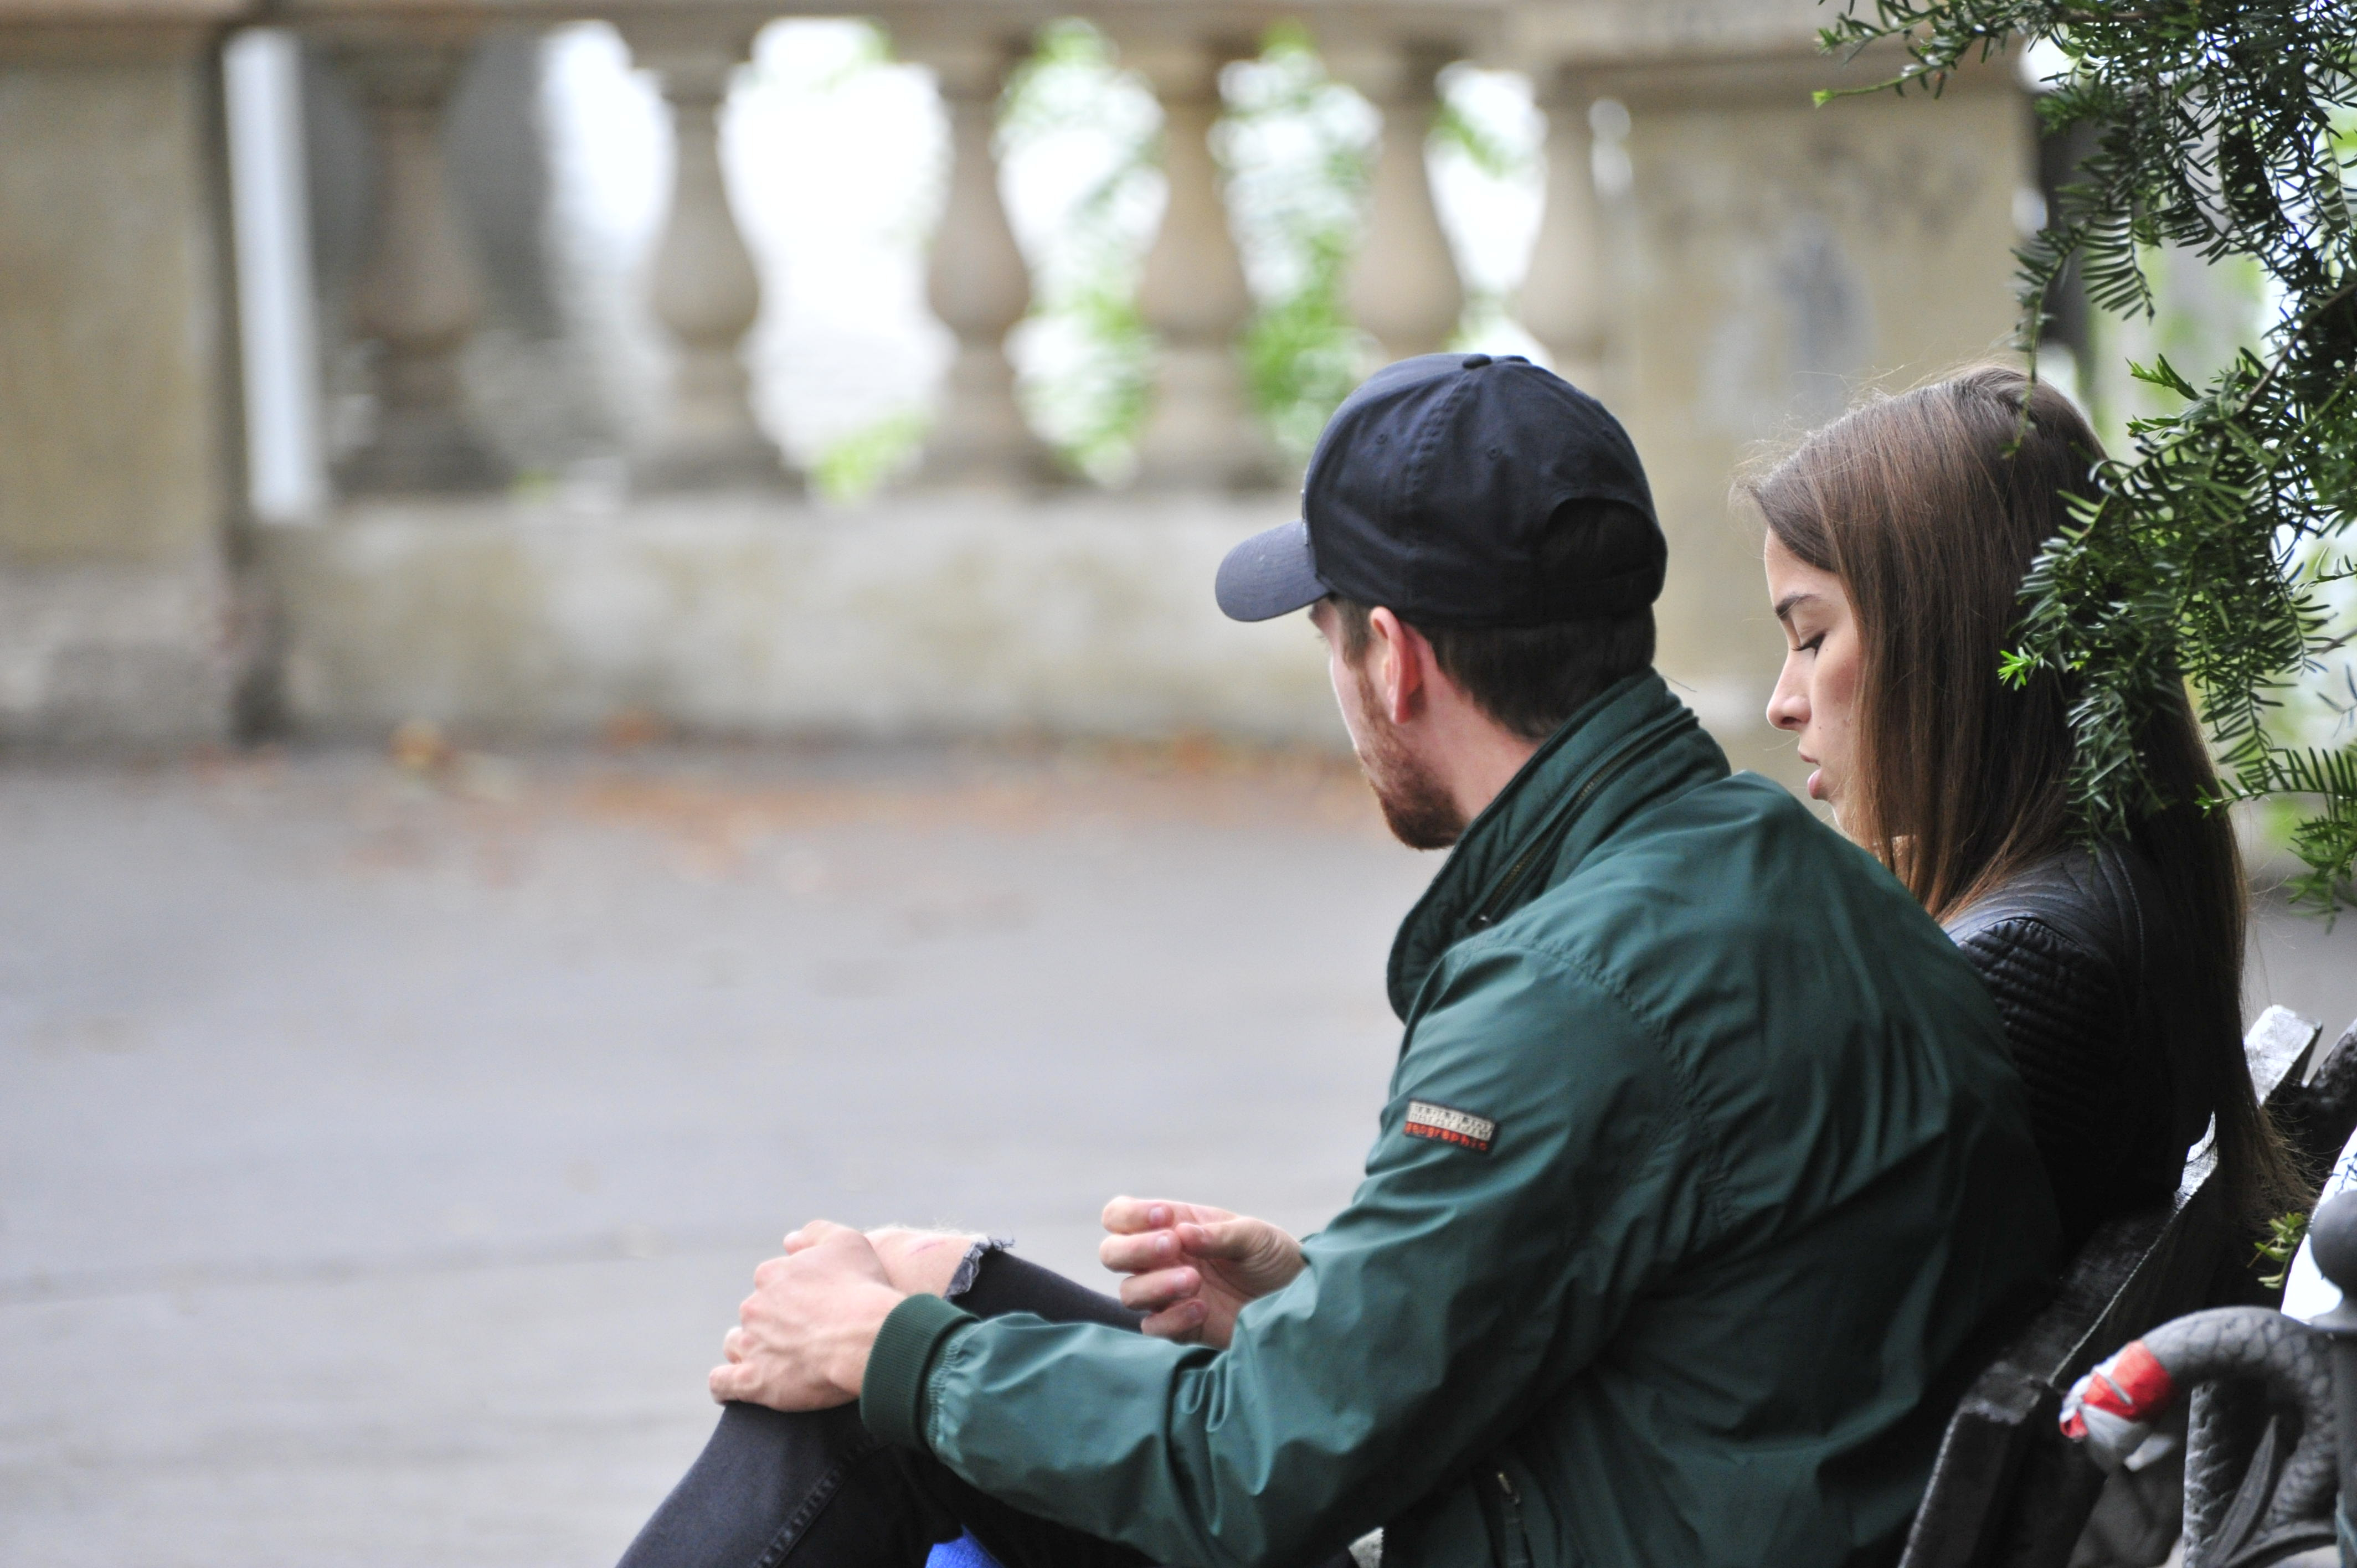 A couple sitting on a bench | Source: Shutterstock